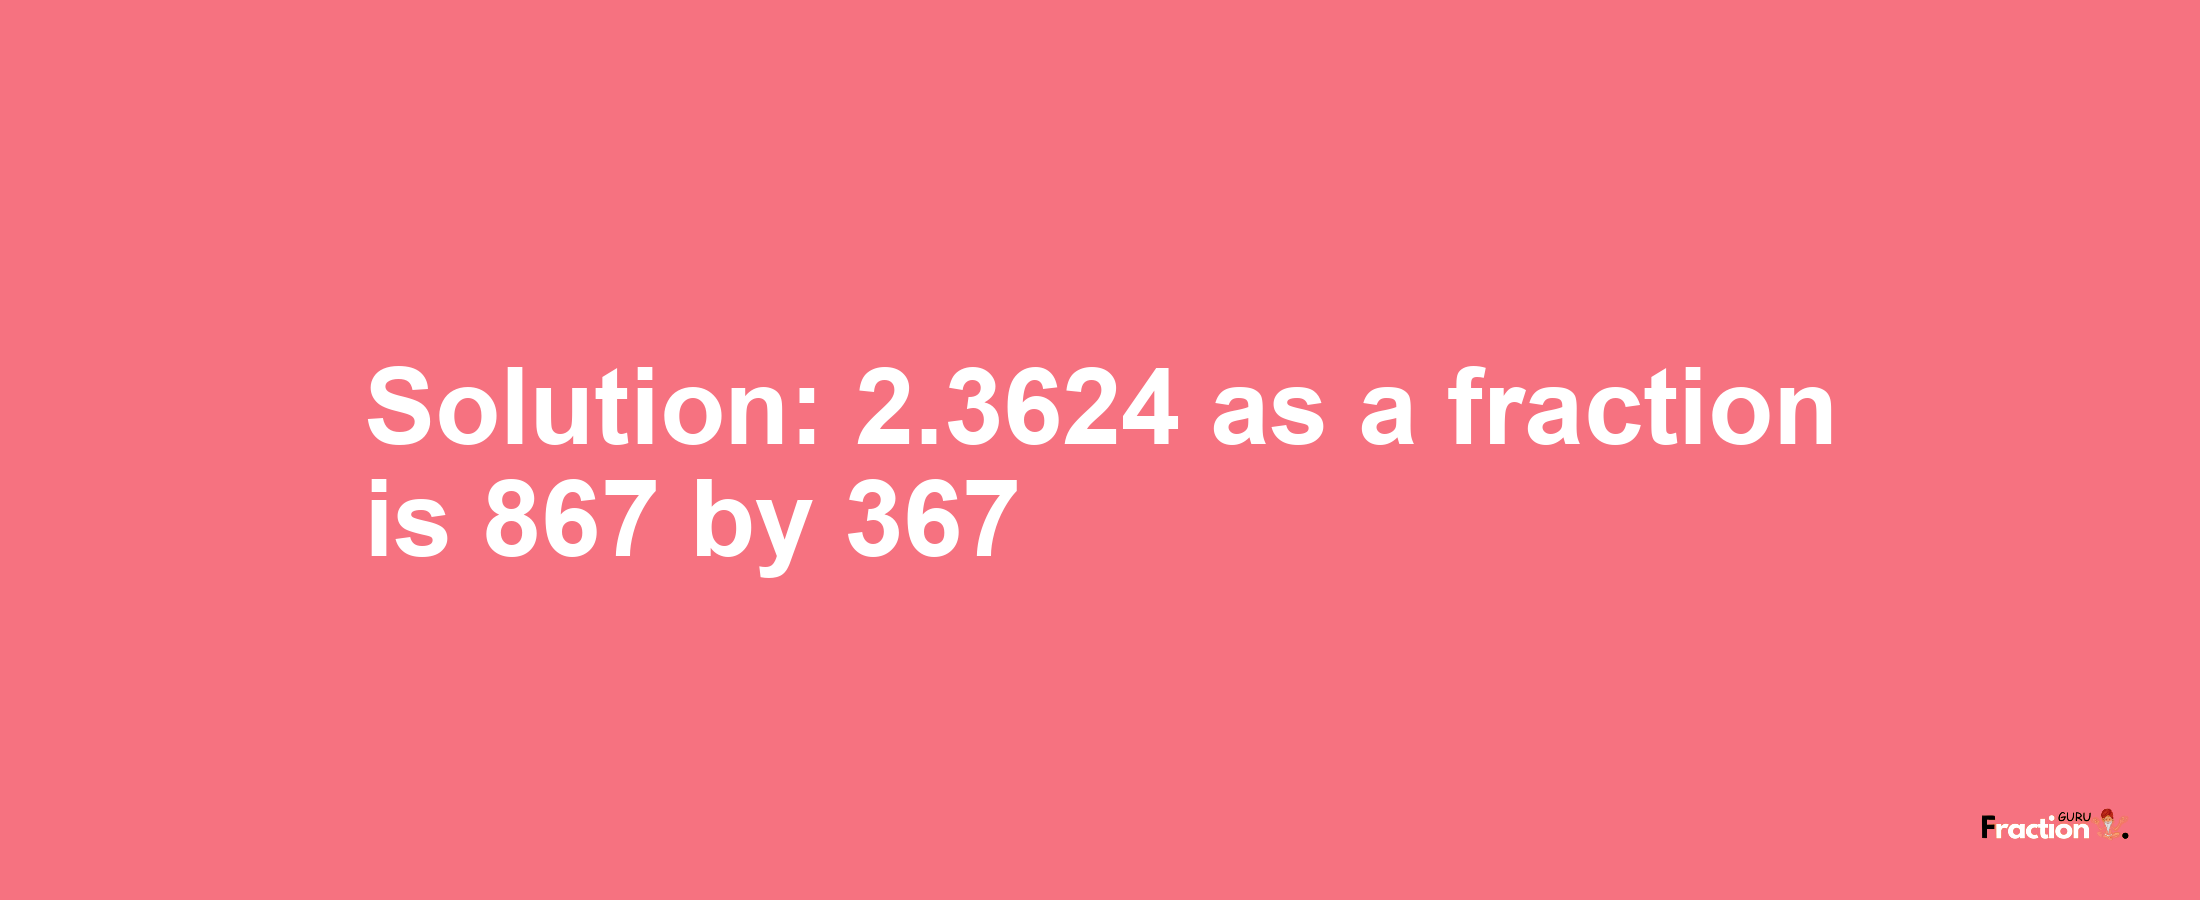 Solution:2.3624 as a fraction is 867/367